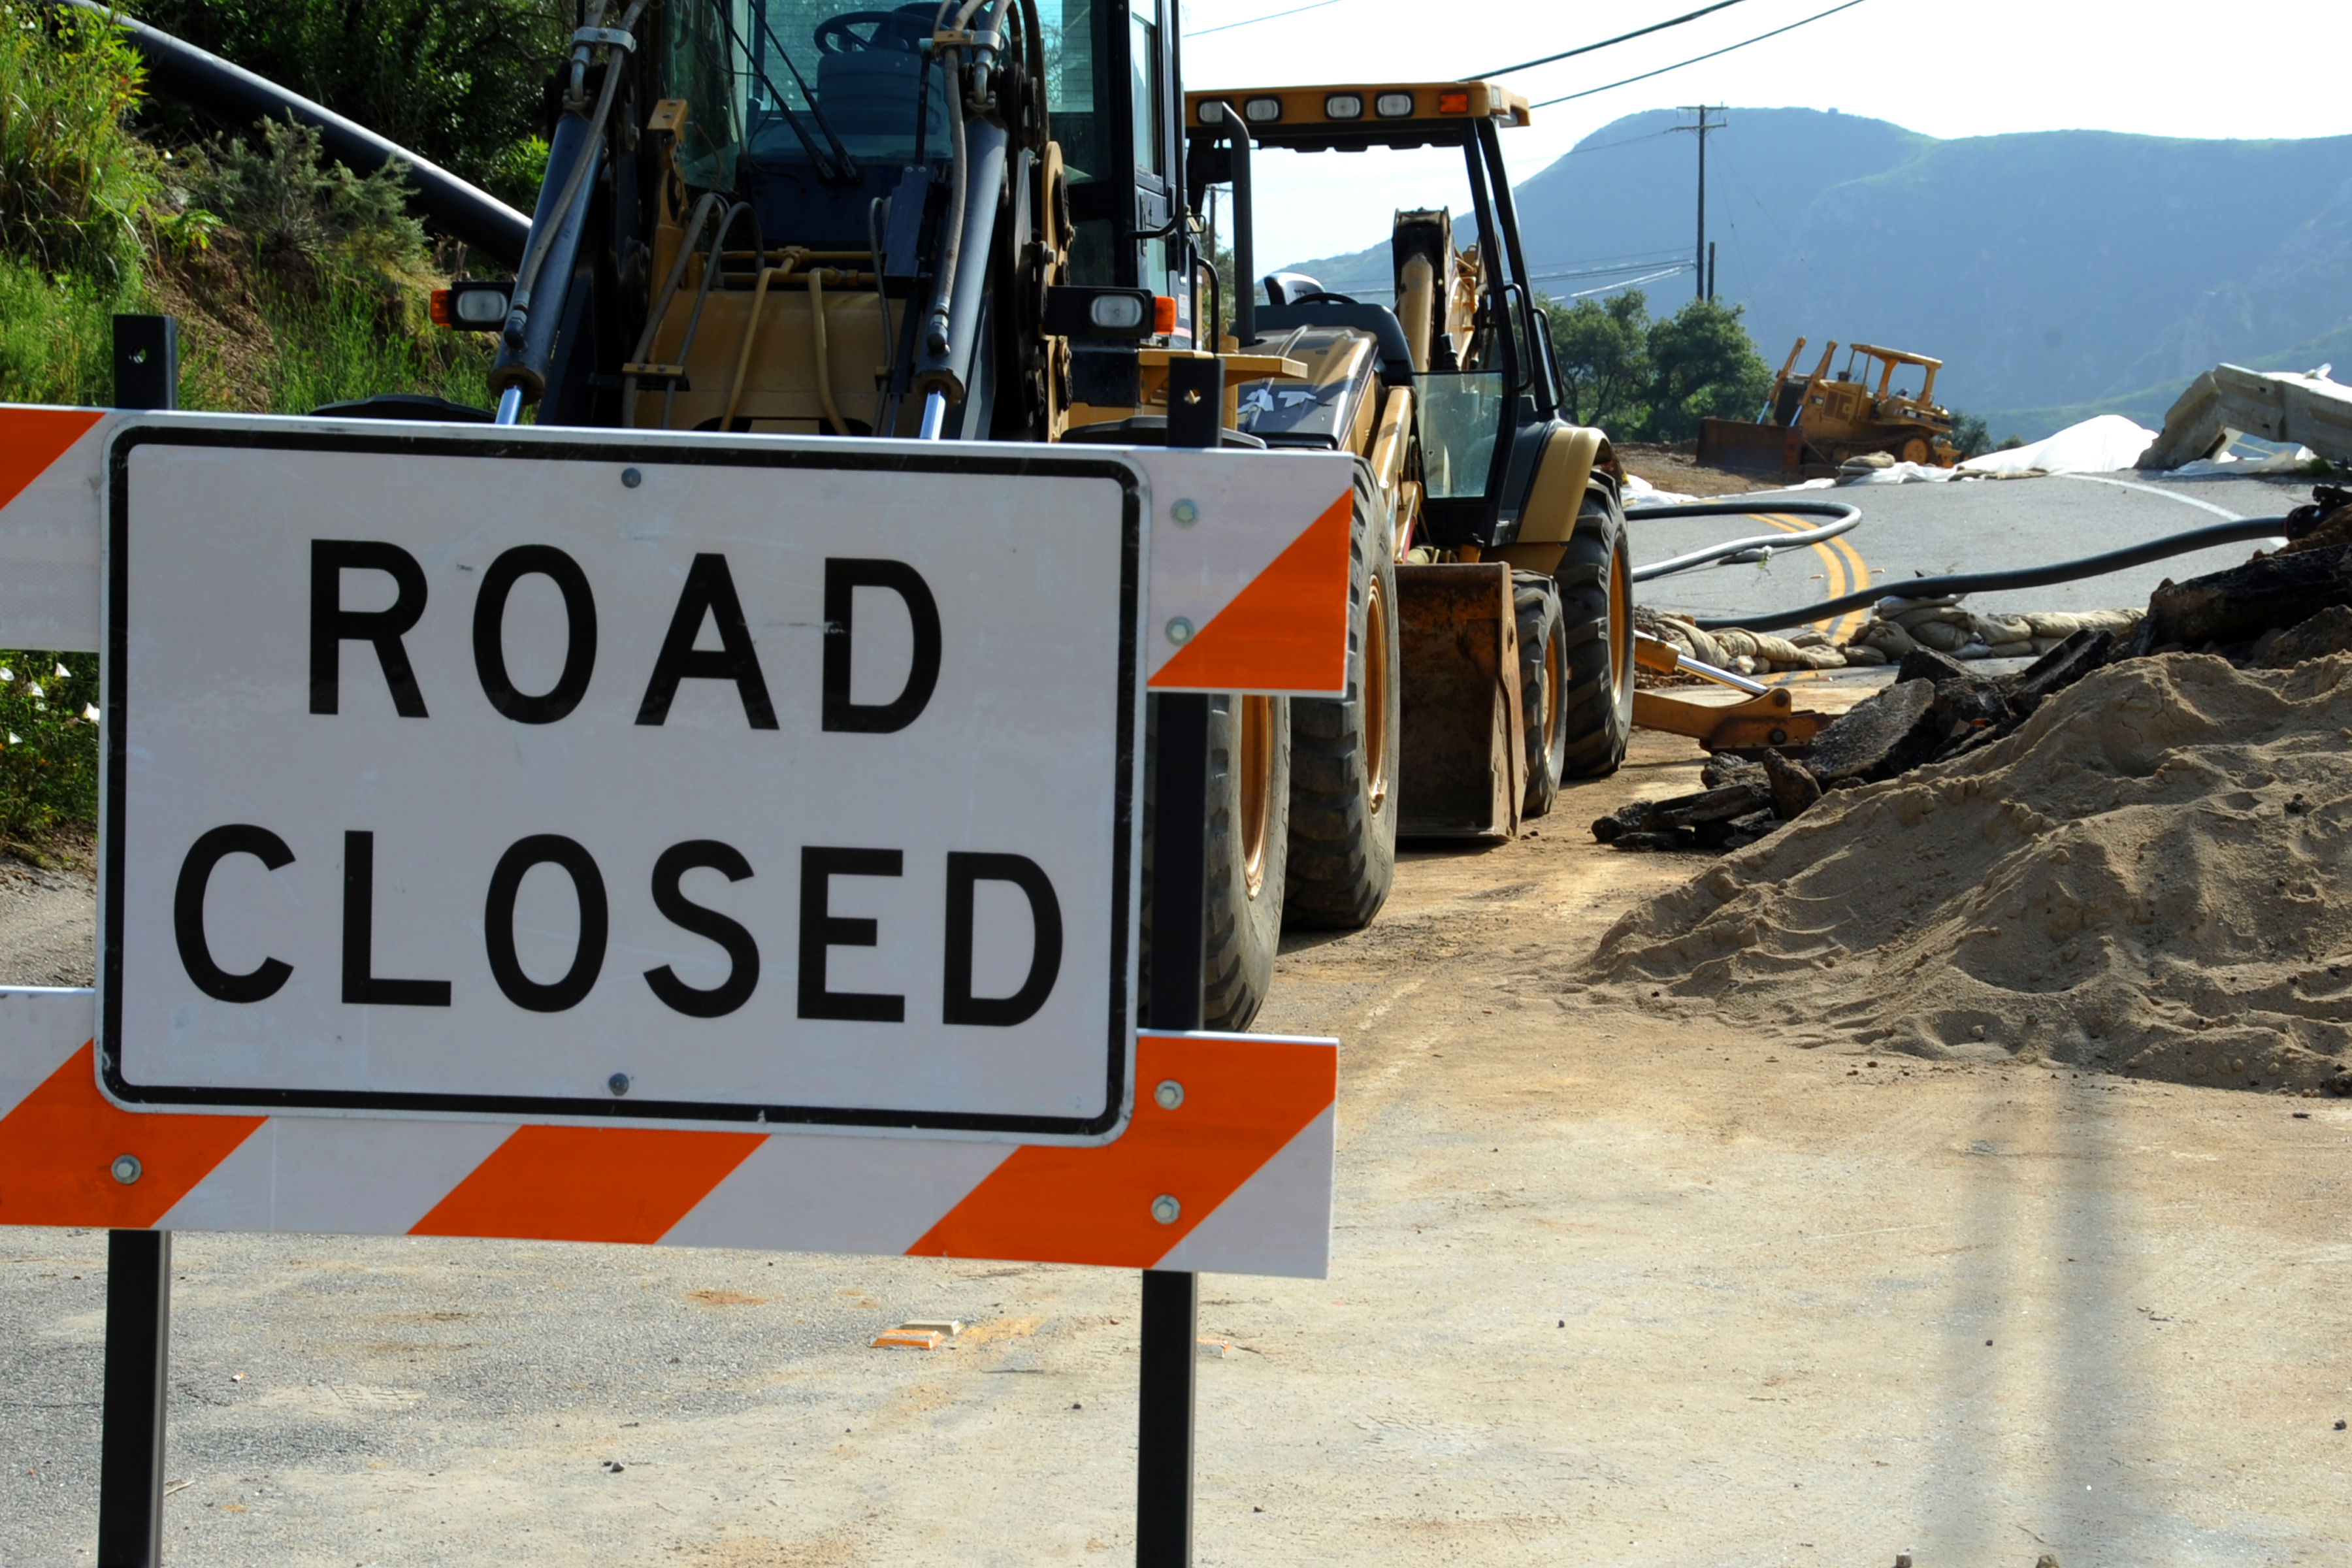 Road Closed for Reconstruction